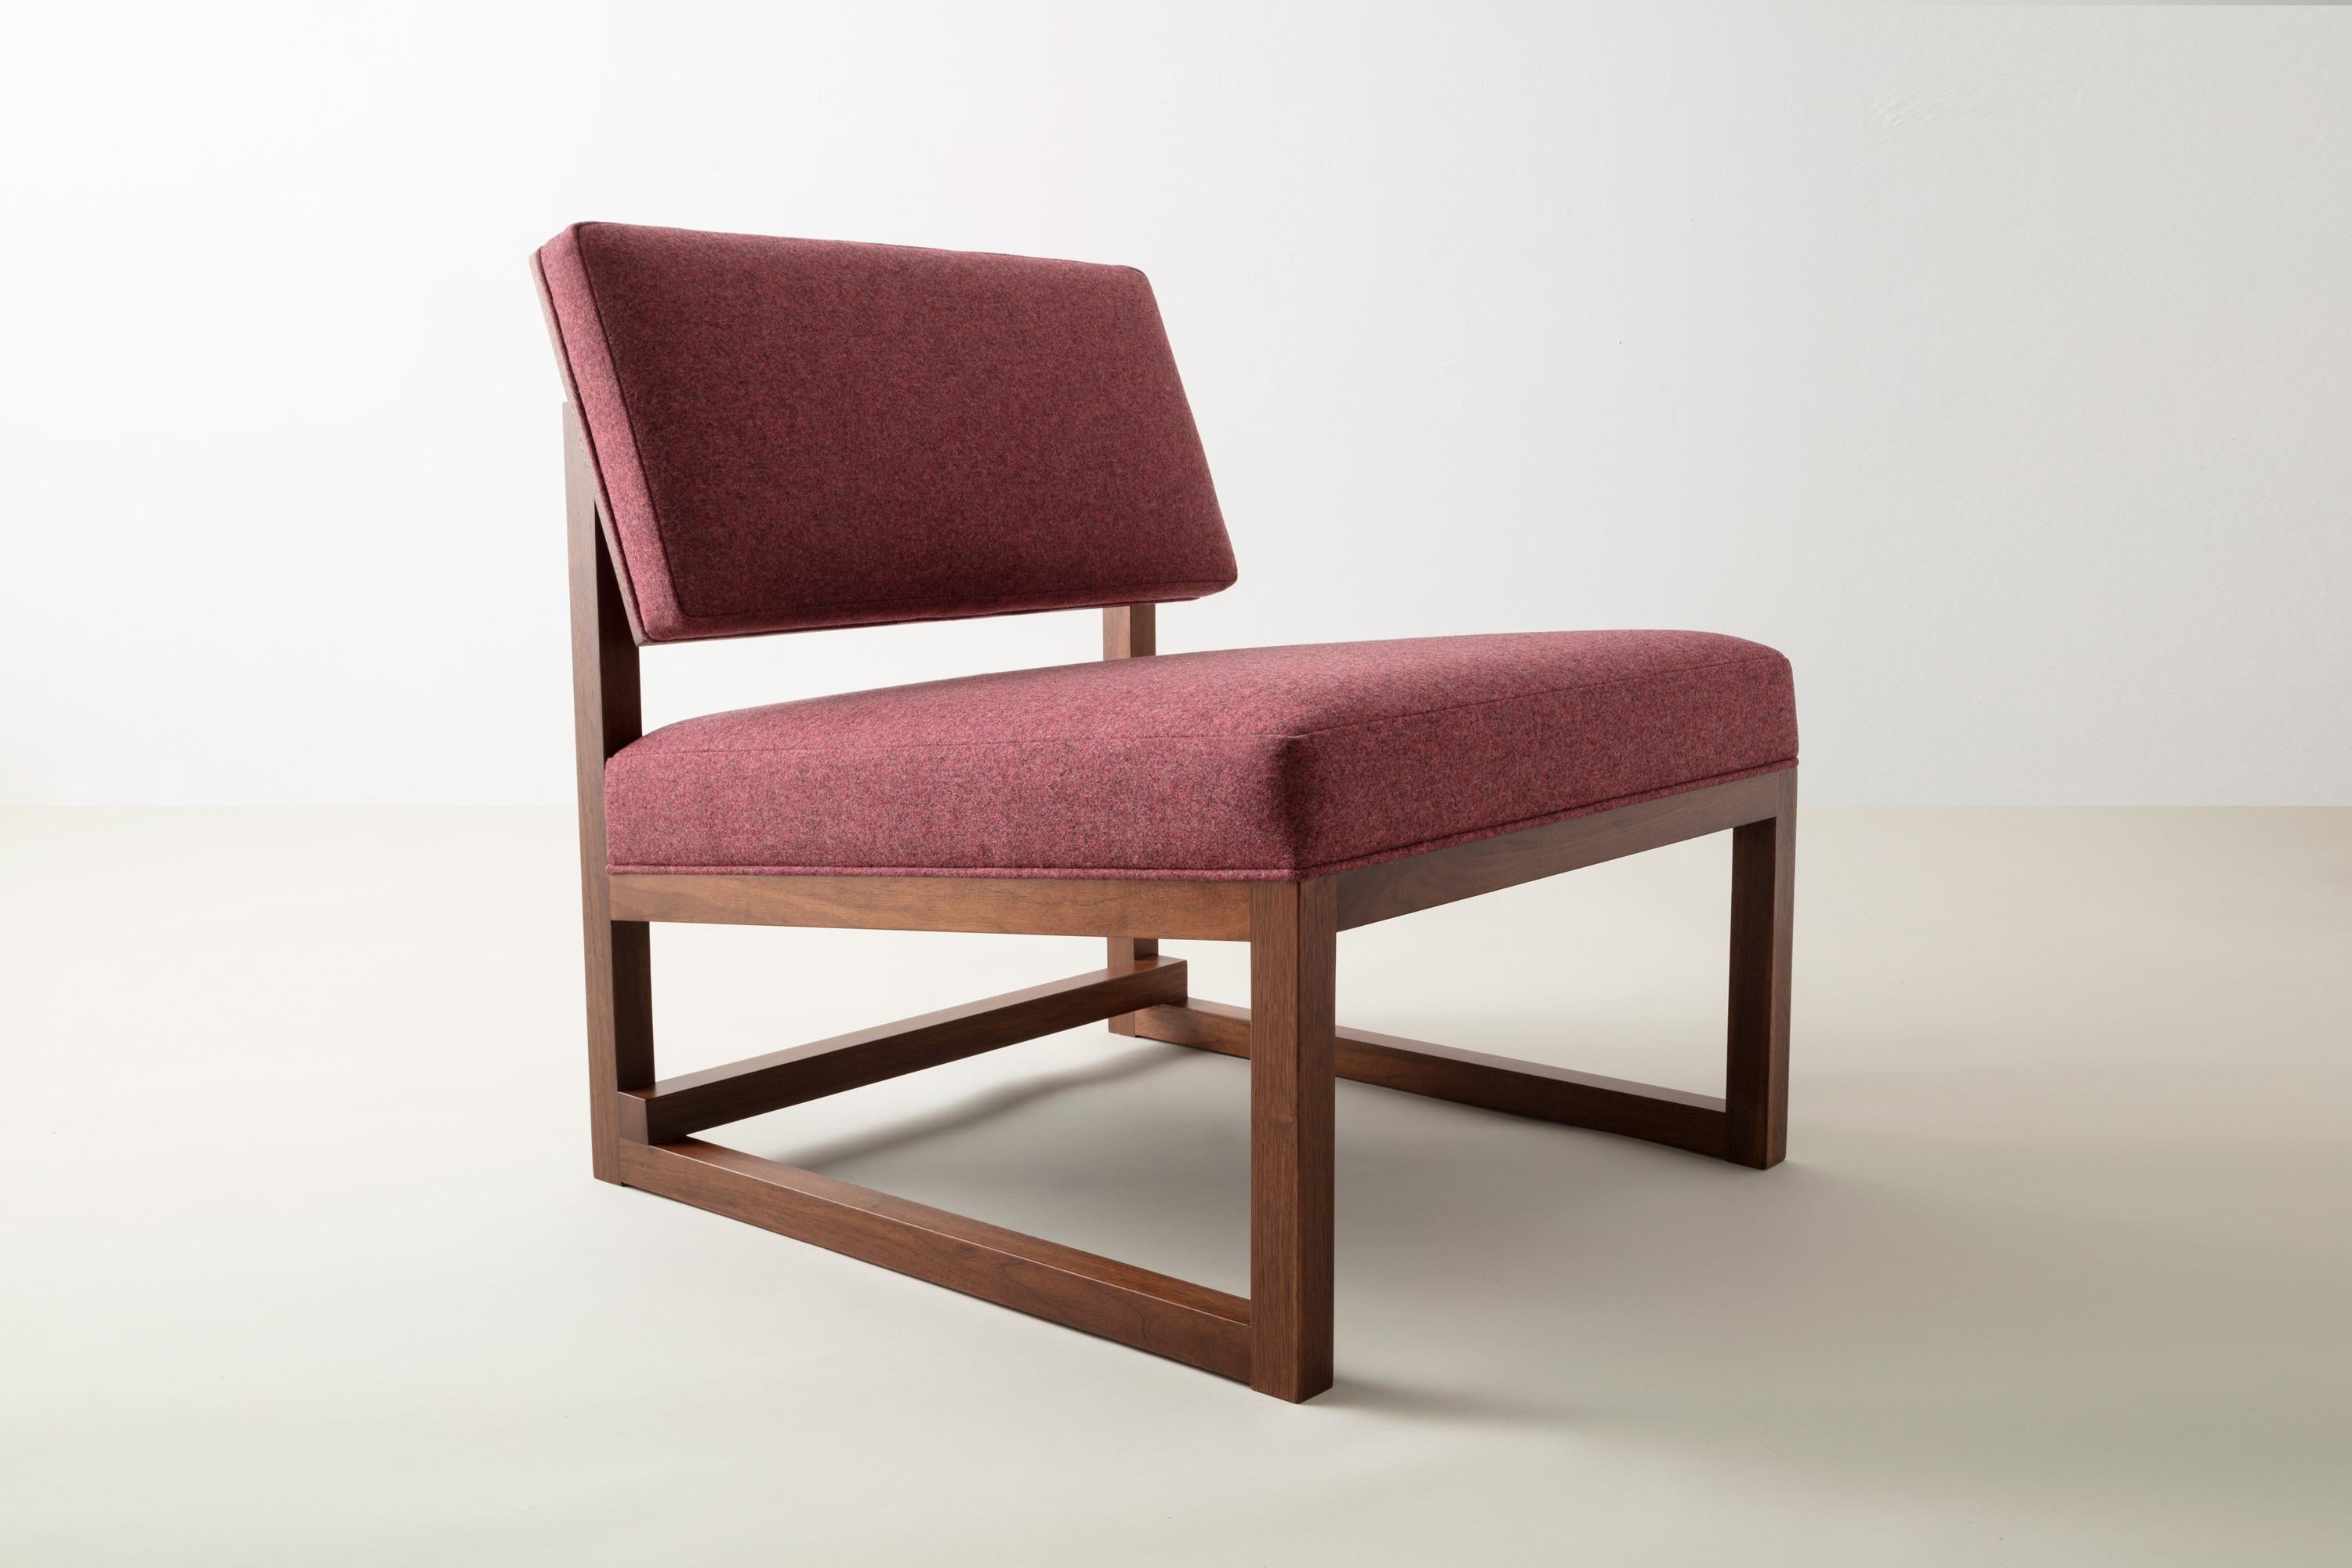 Contemporary SQ Lounge Chair, solid wood, upholstery in felt, boucle or COM, handmade in USA